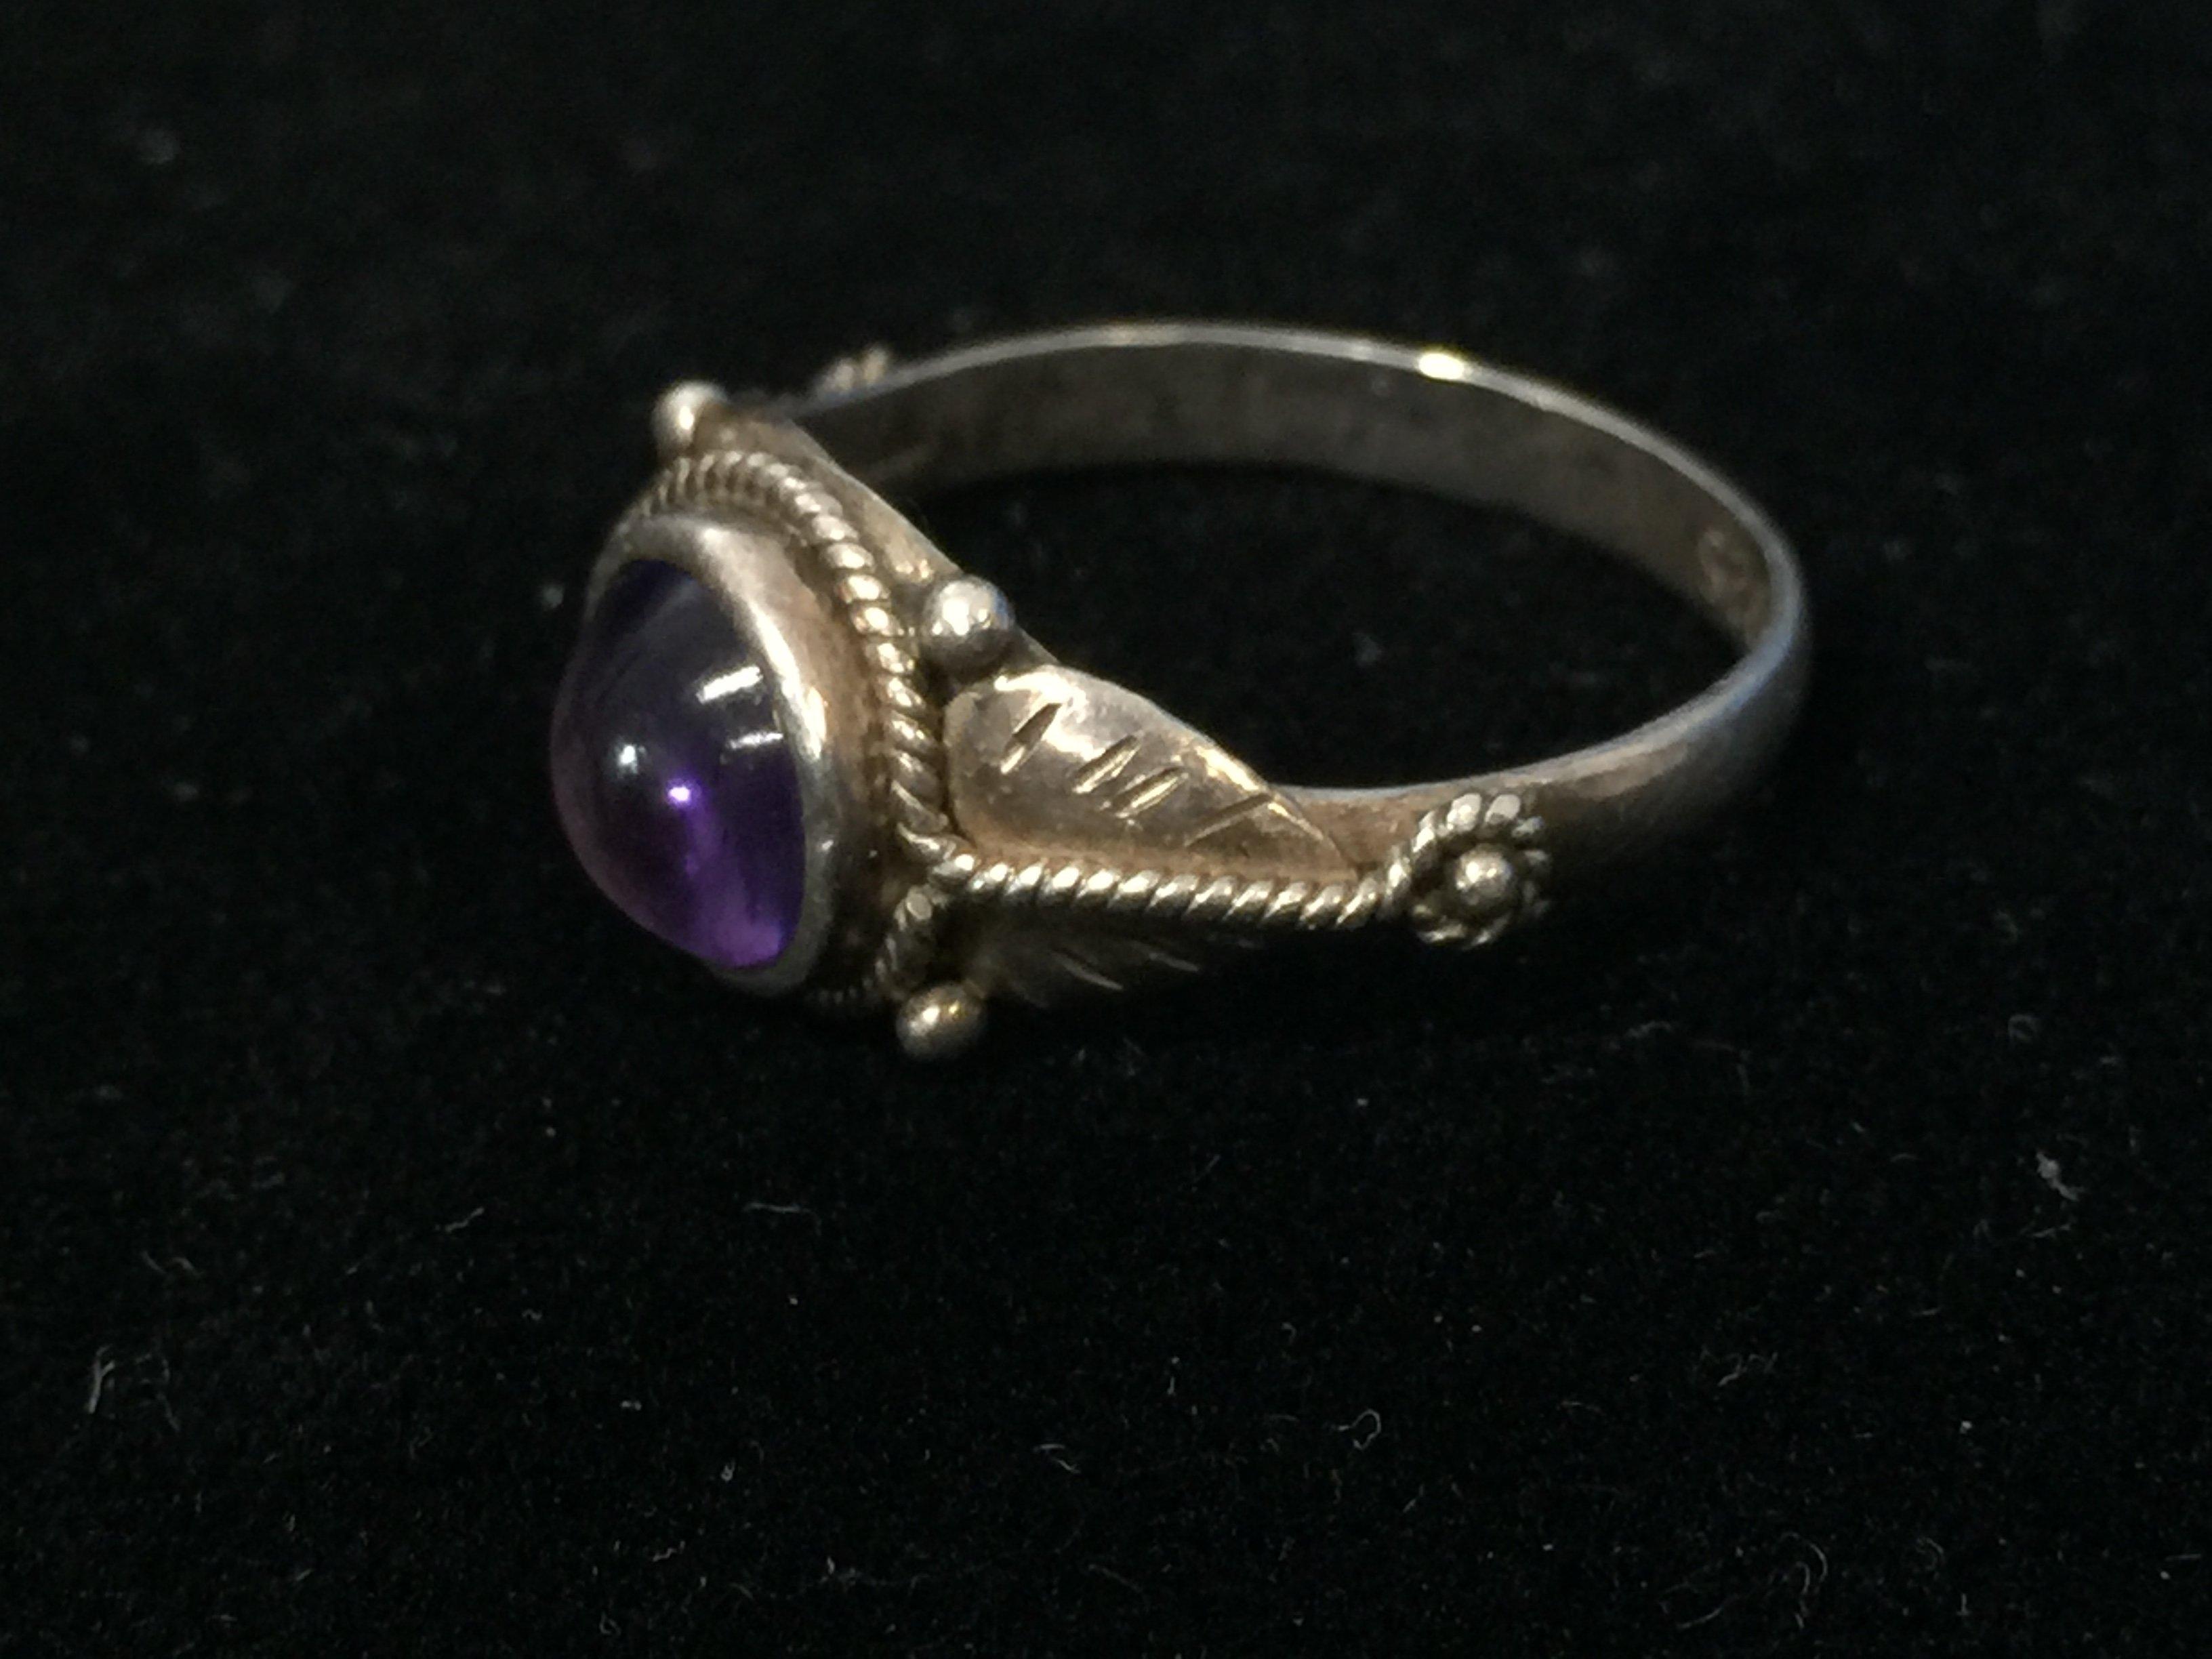 Old Pawn Sterling Silver Leaf Ring W/ Cabachon Amethyst - Size 7